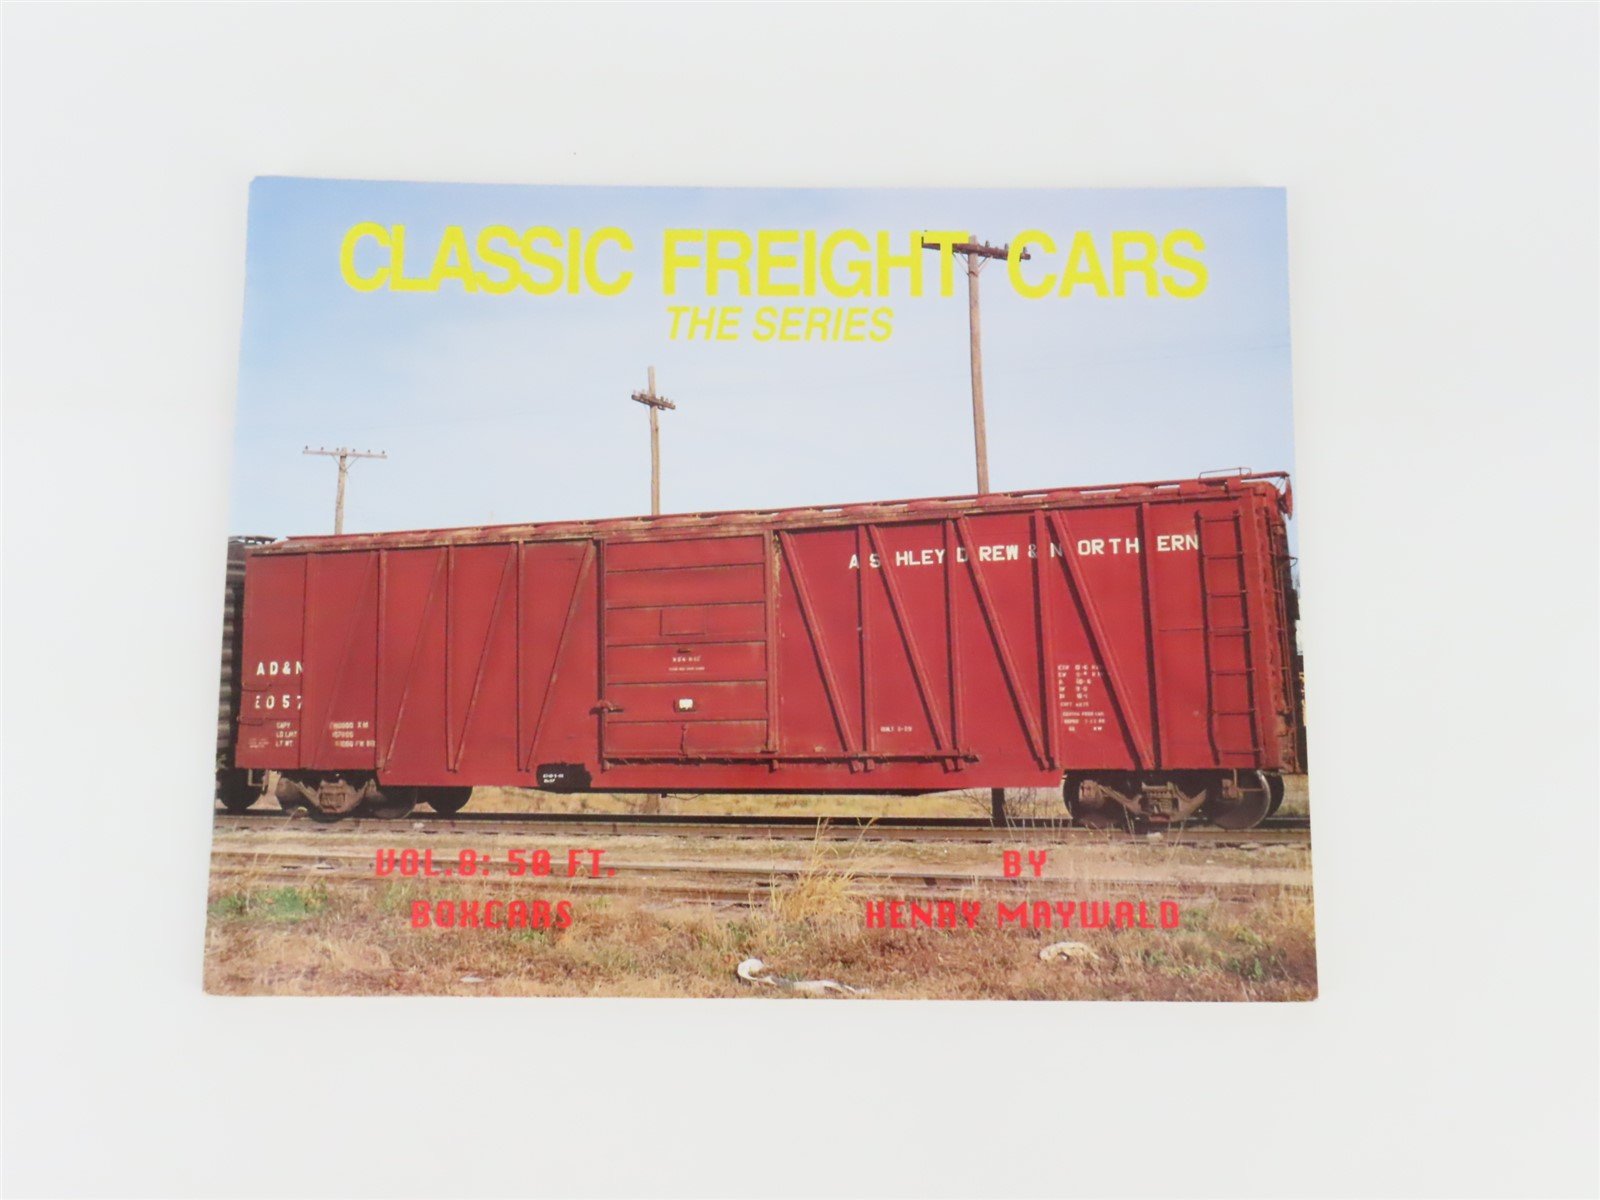 Classic Freight Cars -The Series- Volume 8 by Henry Maywald ©1995 SC Book